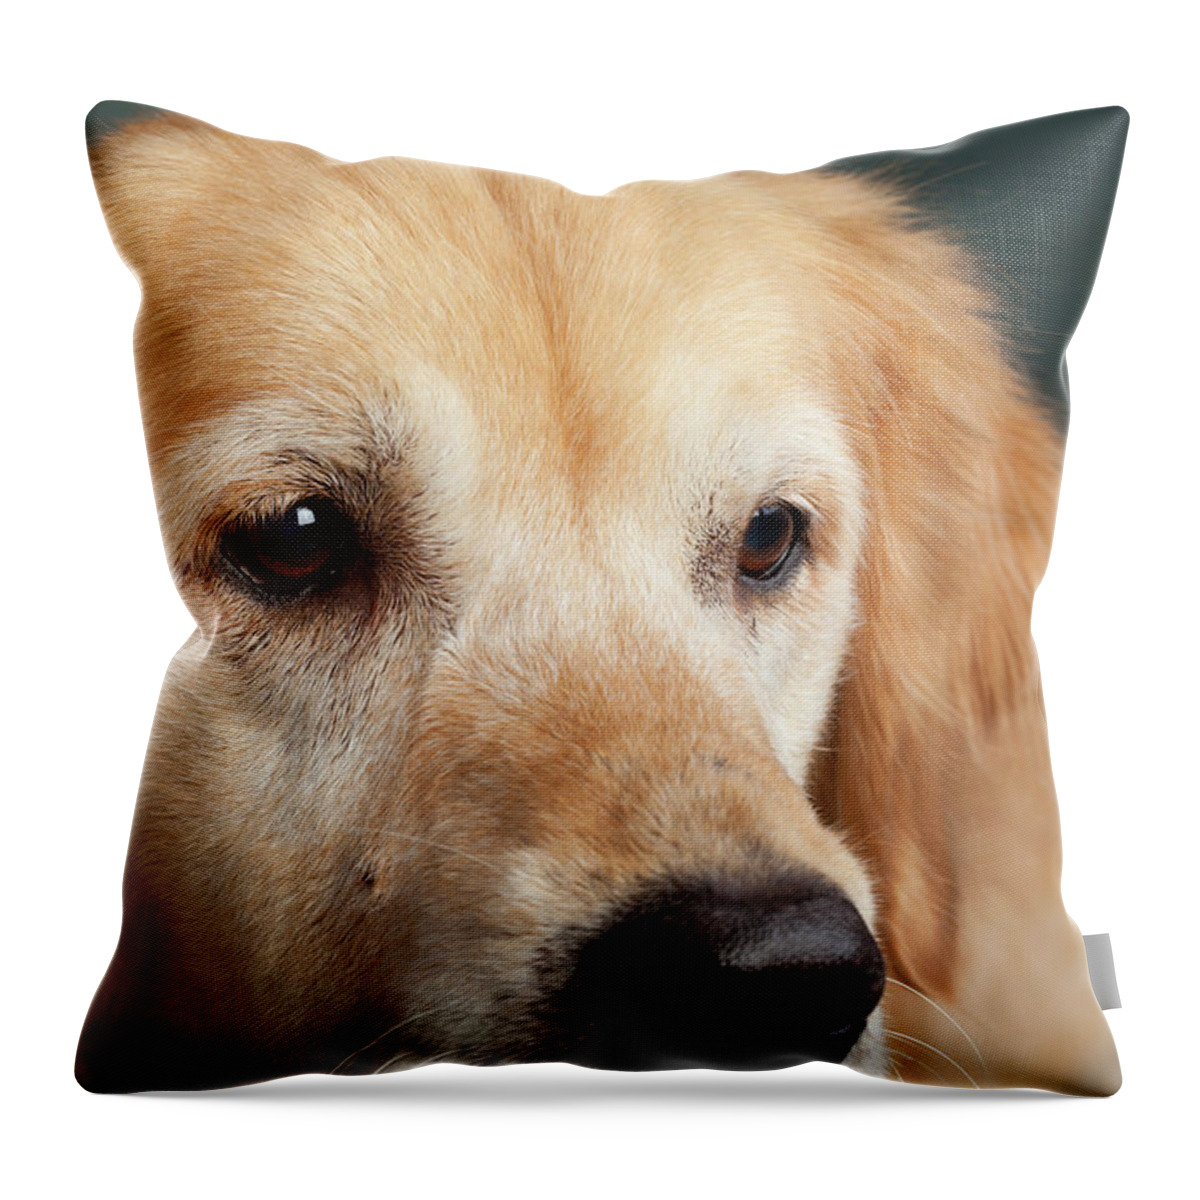 Photography Throw Pillow featuring the photograph Portrait Of A Golden Retriever Dog by Panoramic Images